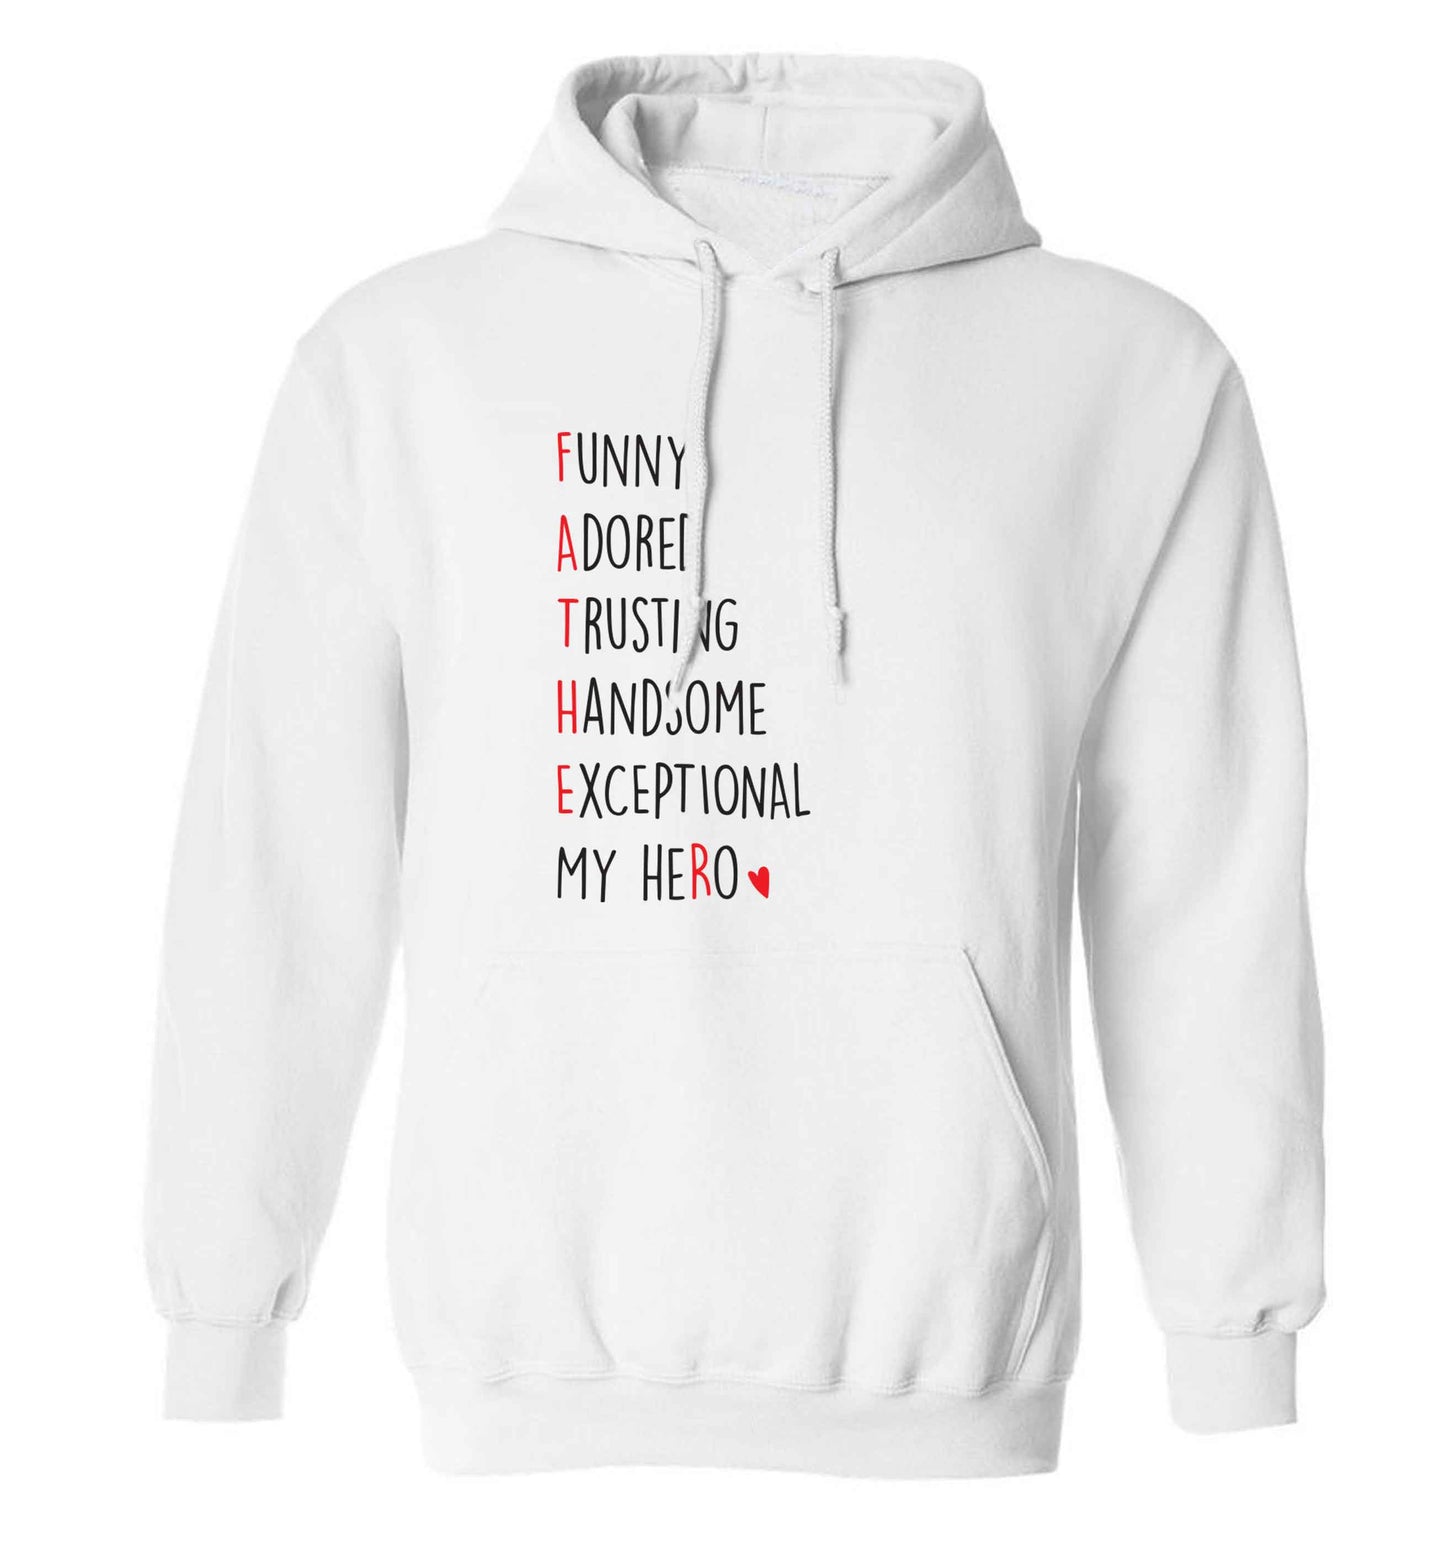 Father meaning hero acrostic poem adults unisex white hoodie 2XL